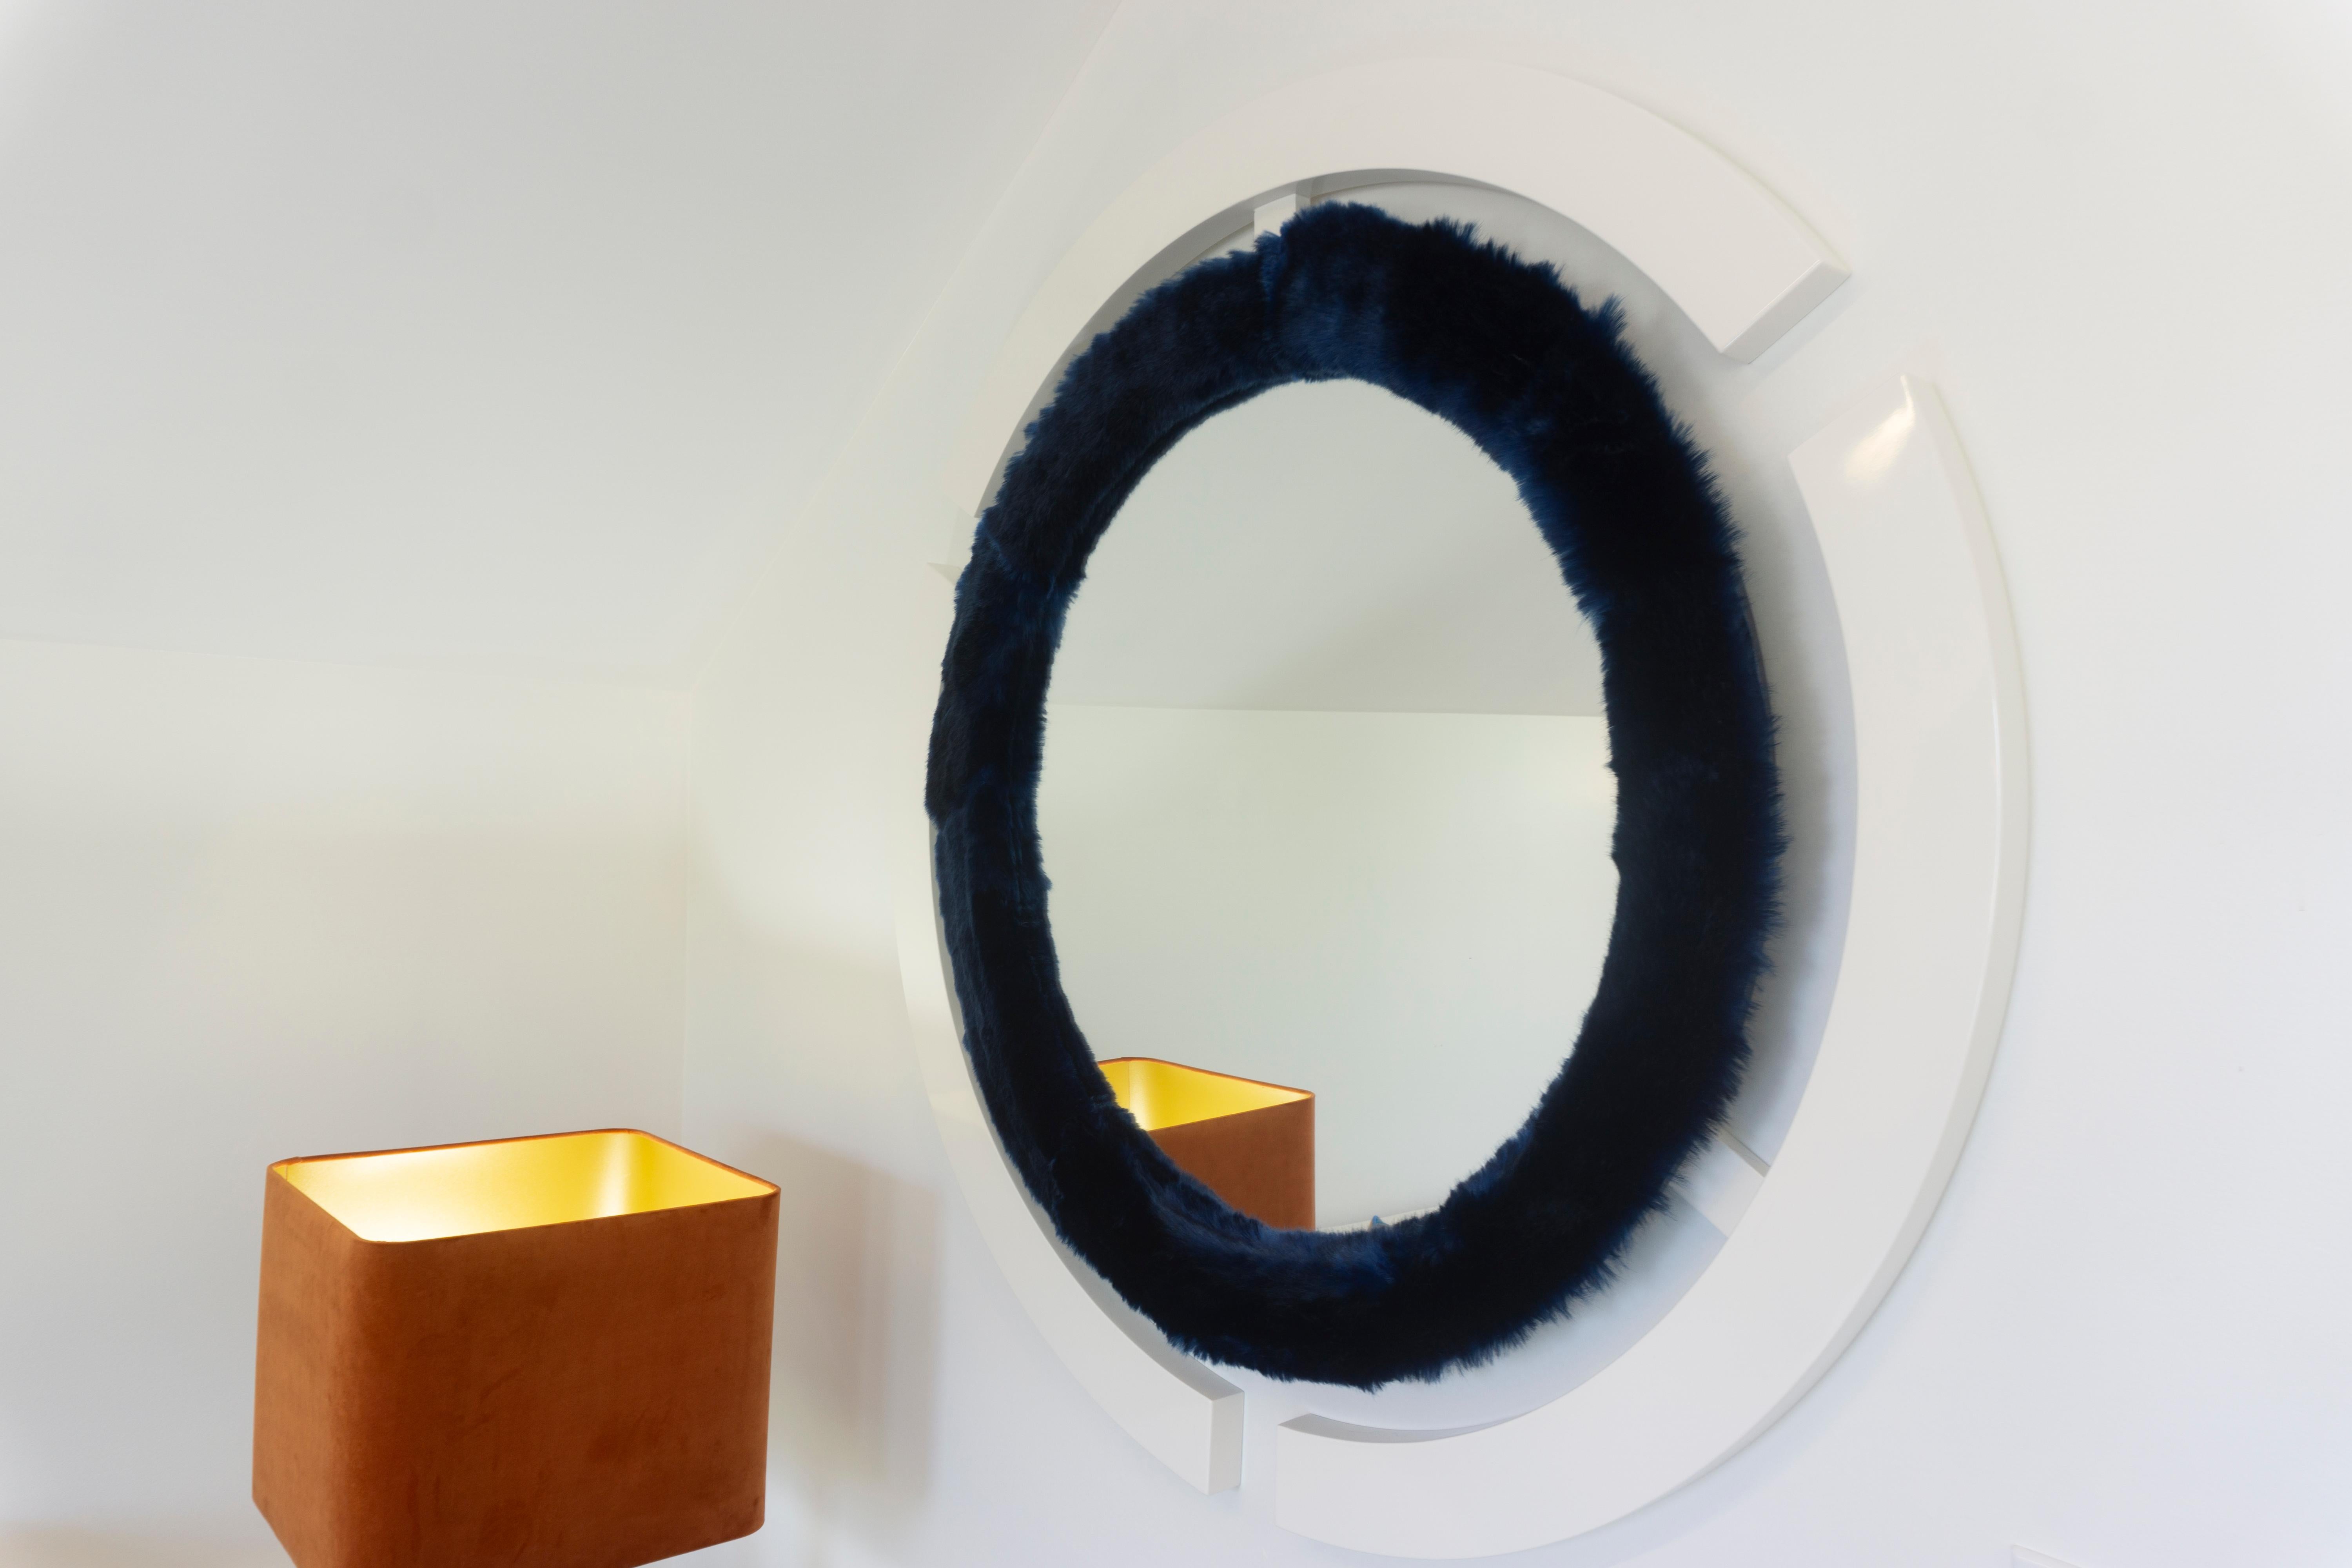 A modern handmade round wall mirror inspired by Space Age decor with a wild twist. The glass mirror is bordered with faux rabbit fur and a white lacquered rim. Custom sizes and finishes available upon request. Made to order.

Handcrafted at our